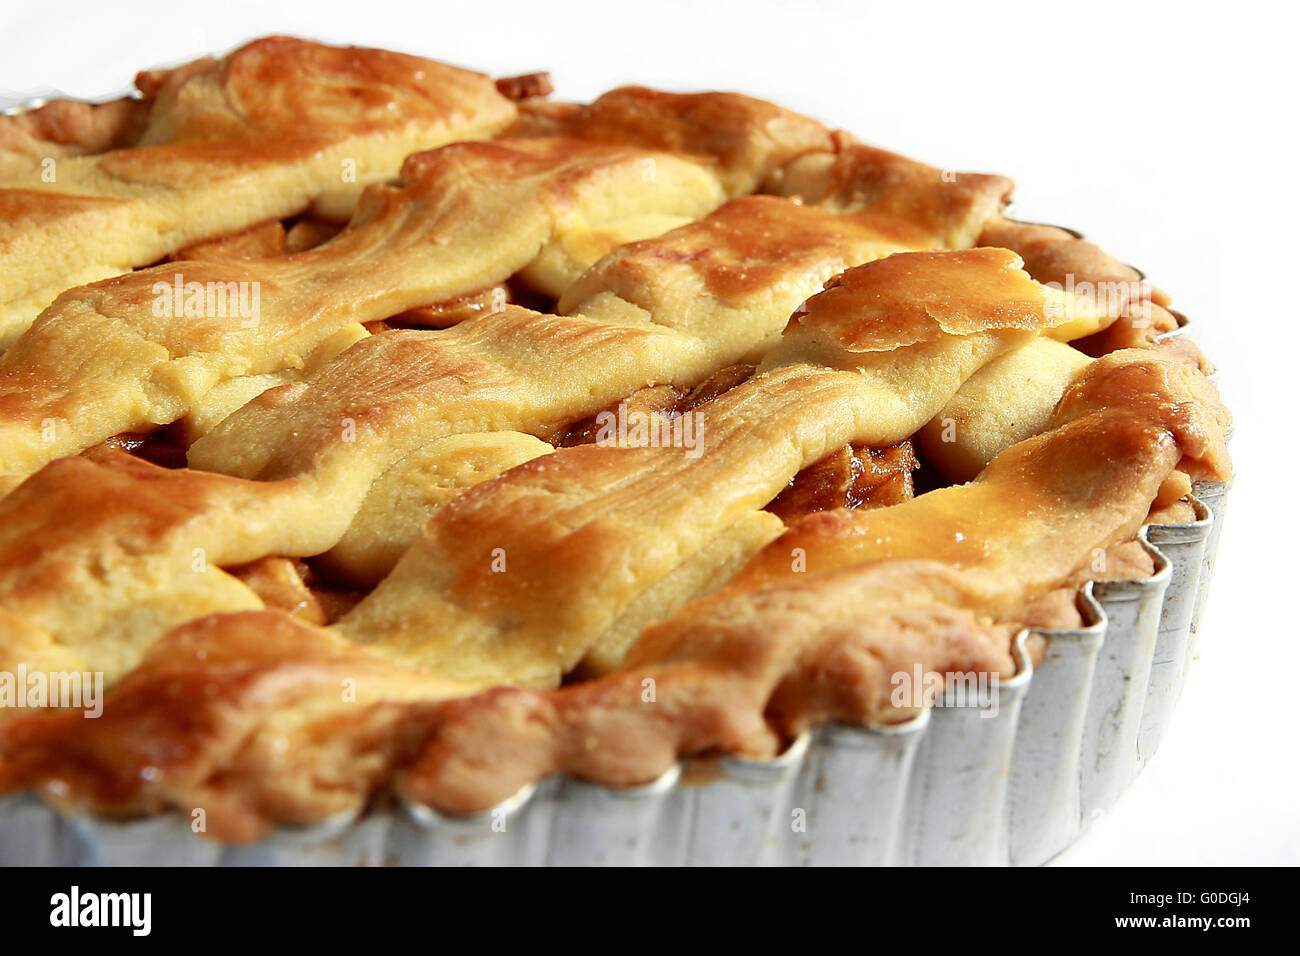 Food photography close up photo of an apple pie Stock Photo